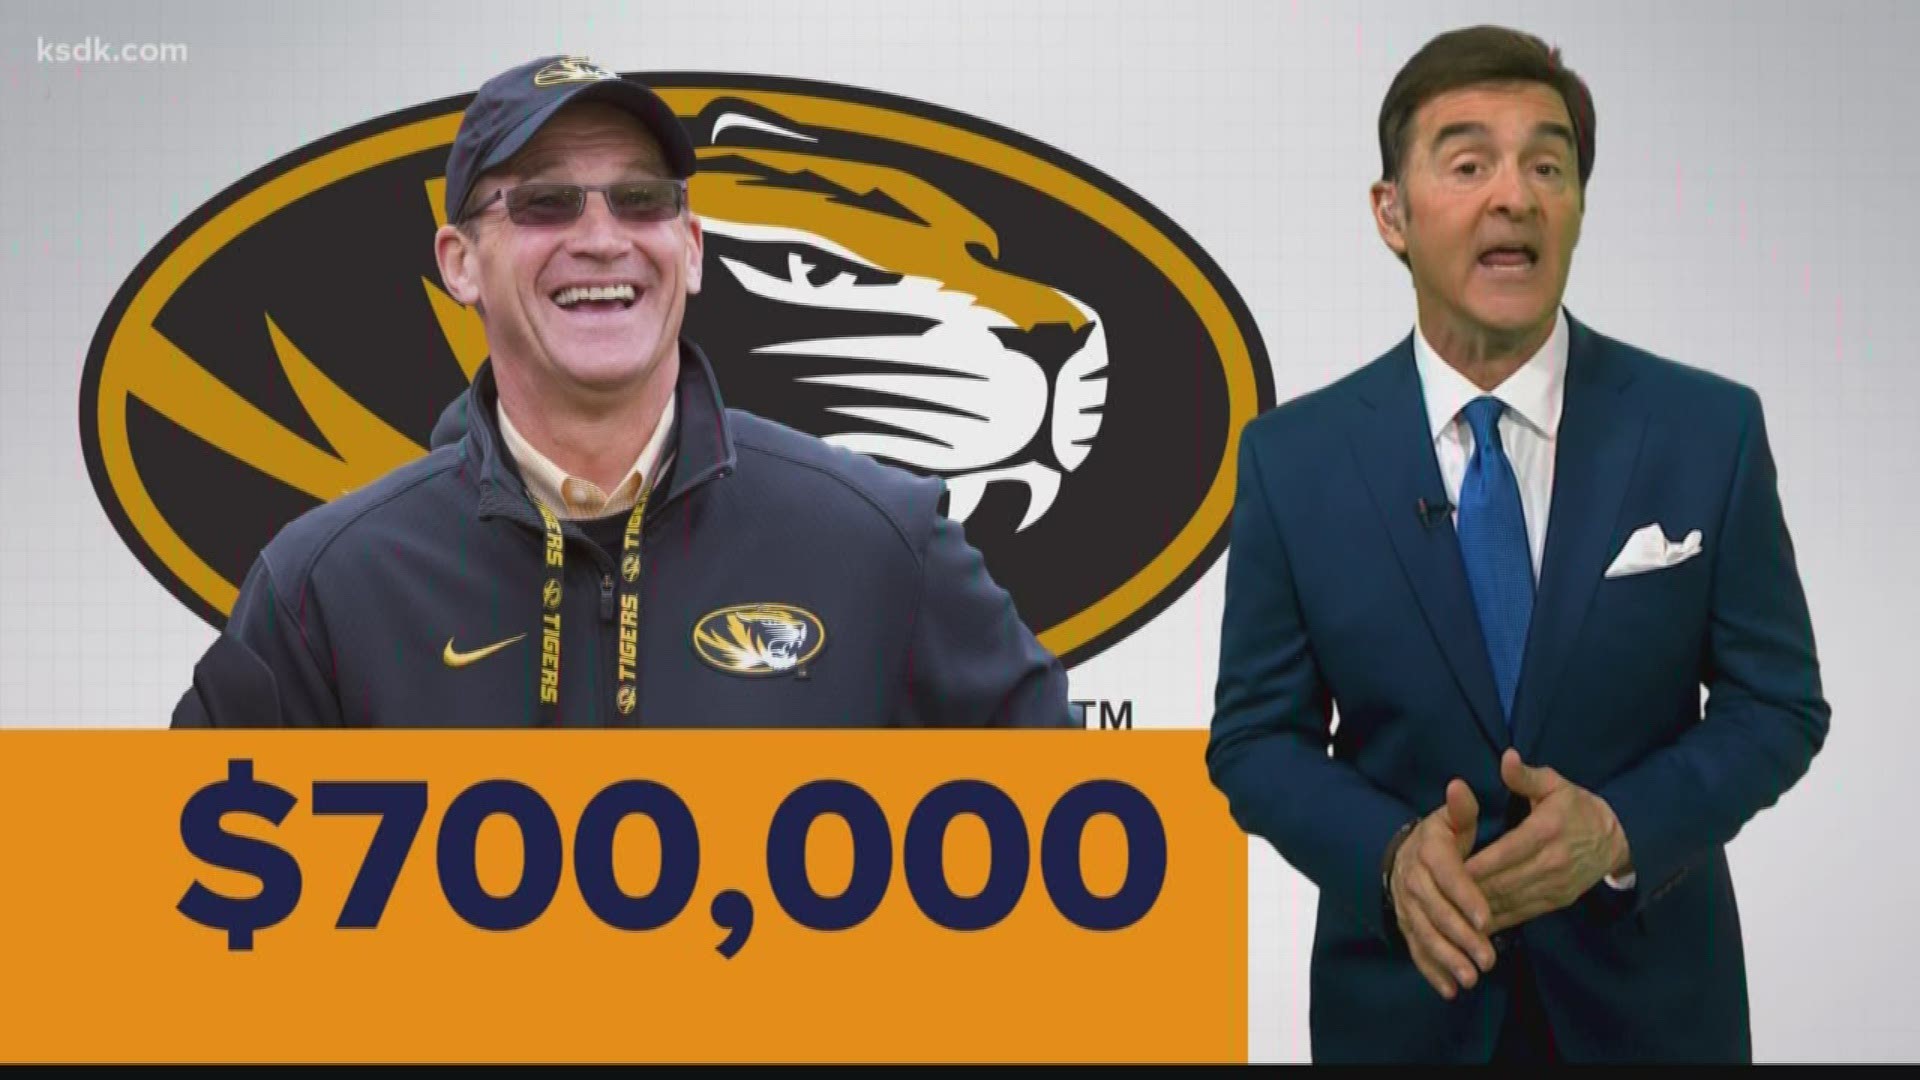 Here's Frank's opinion: the University of Missouri is paying athletic director Jim Sterk $700,000 a year. Can't they make the hire themselves?